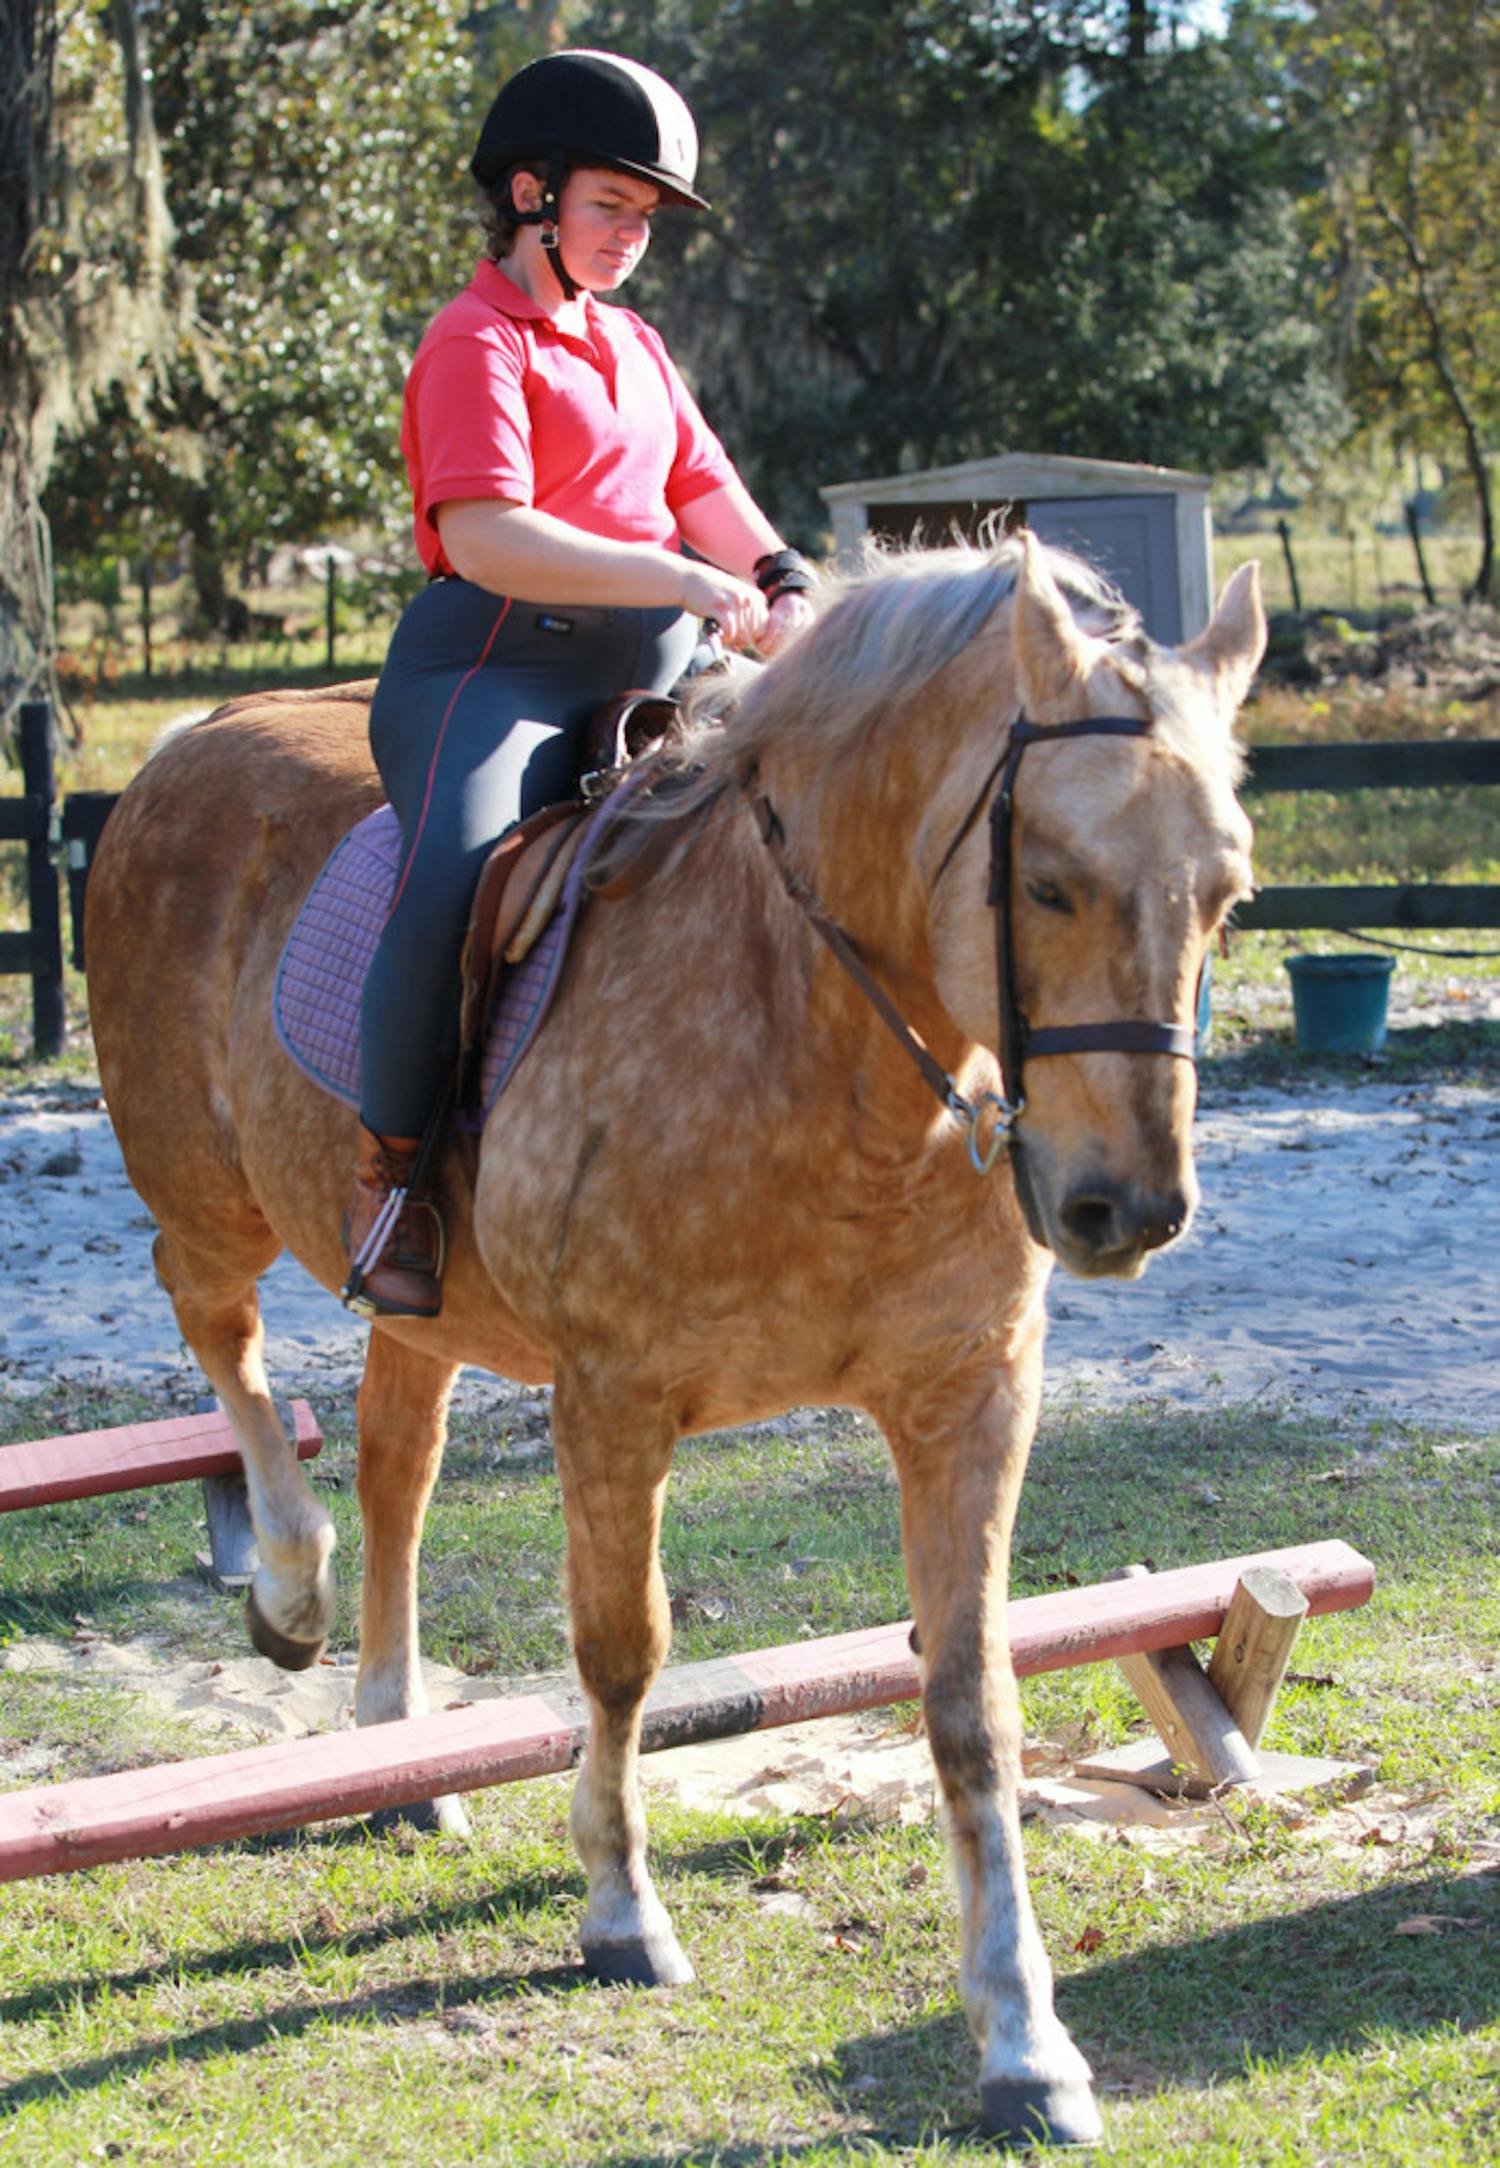 Kathy Gray, 35, of Citra, Fla., rides Barney at the High Times Ranch, a therapeutic horse ranch.